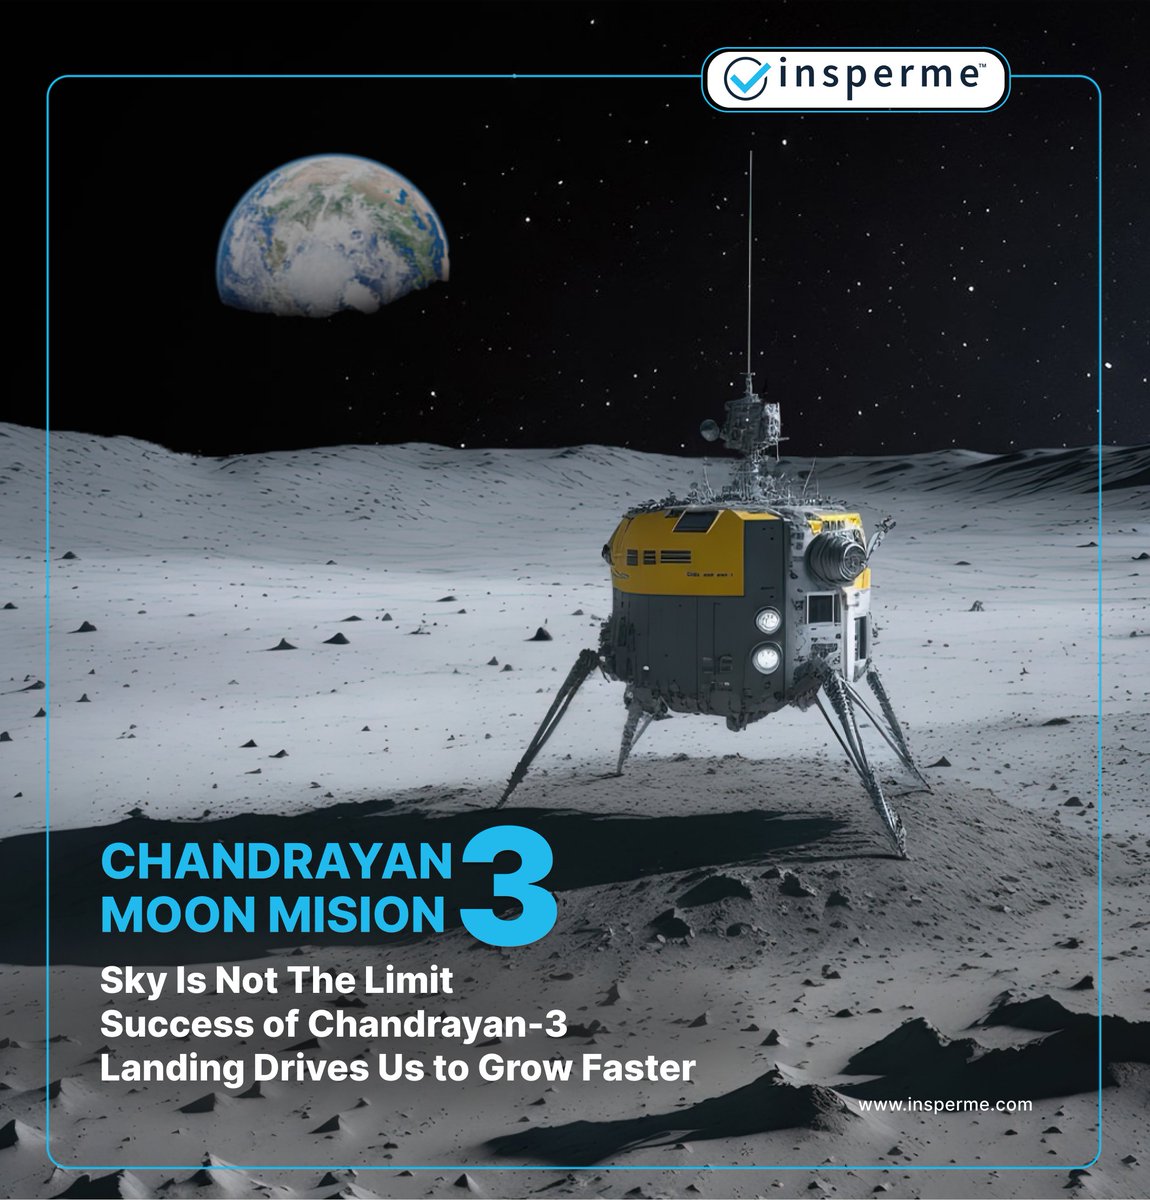 Embracing innovation with the boldness of Chandrayaan's leaps, our creative success touch down flawlessly, every single time. 
.
#FlawlessVictory #TeamIndiaTriumphs #clientscreative #creativework #moonlanding #moonsurface #chandrayaan3